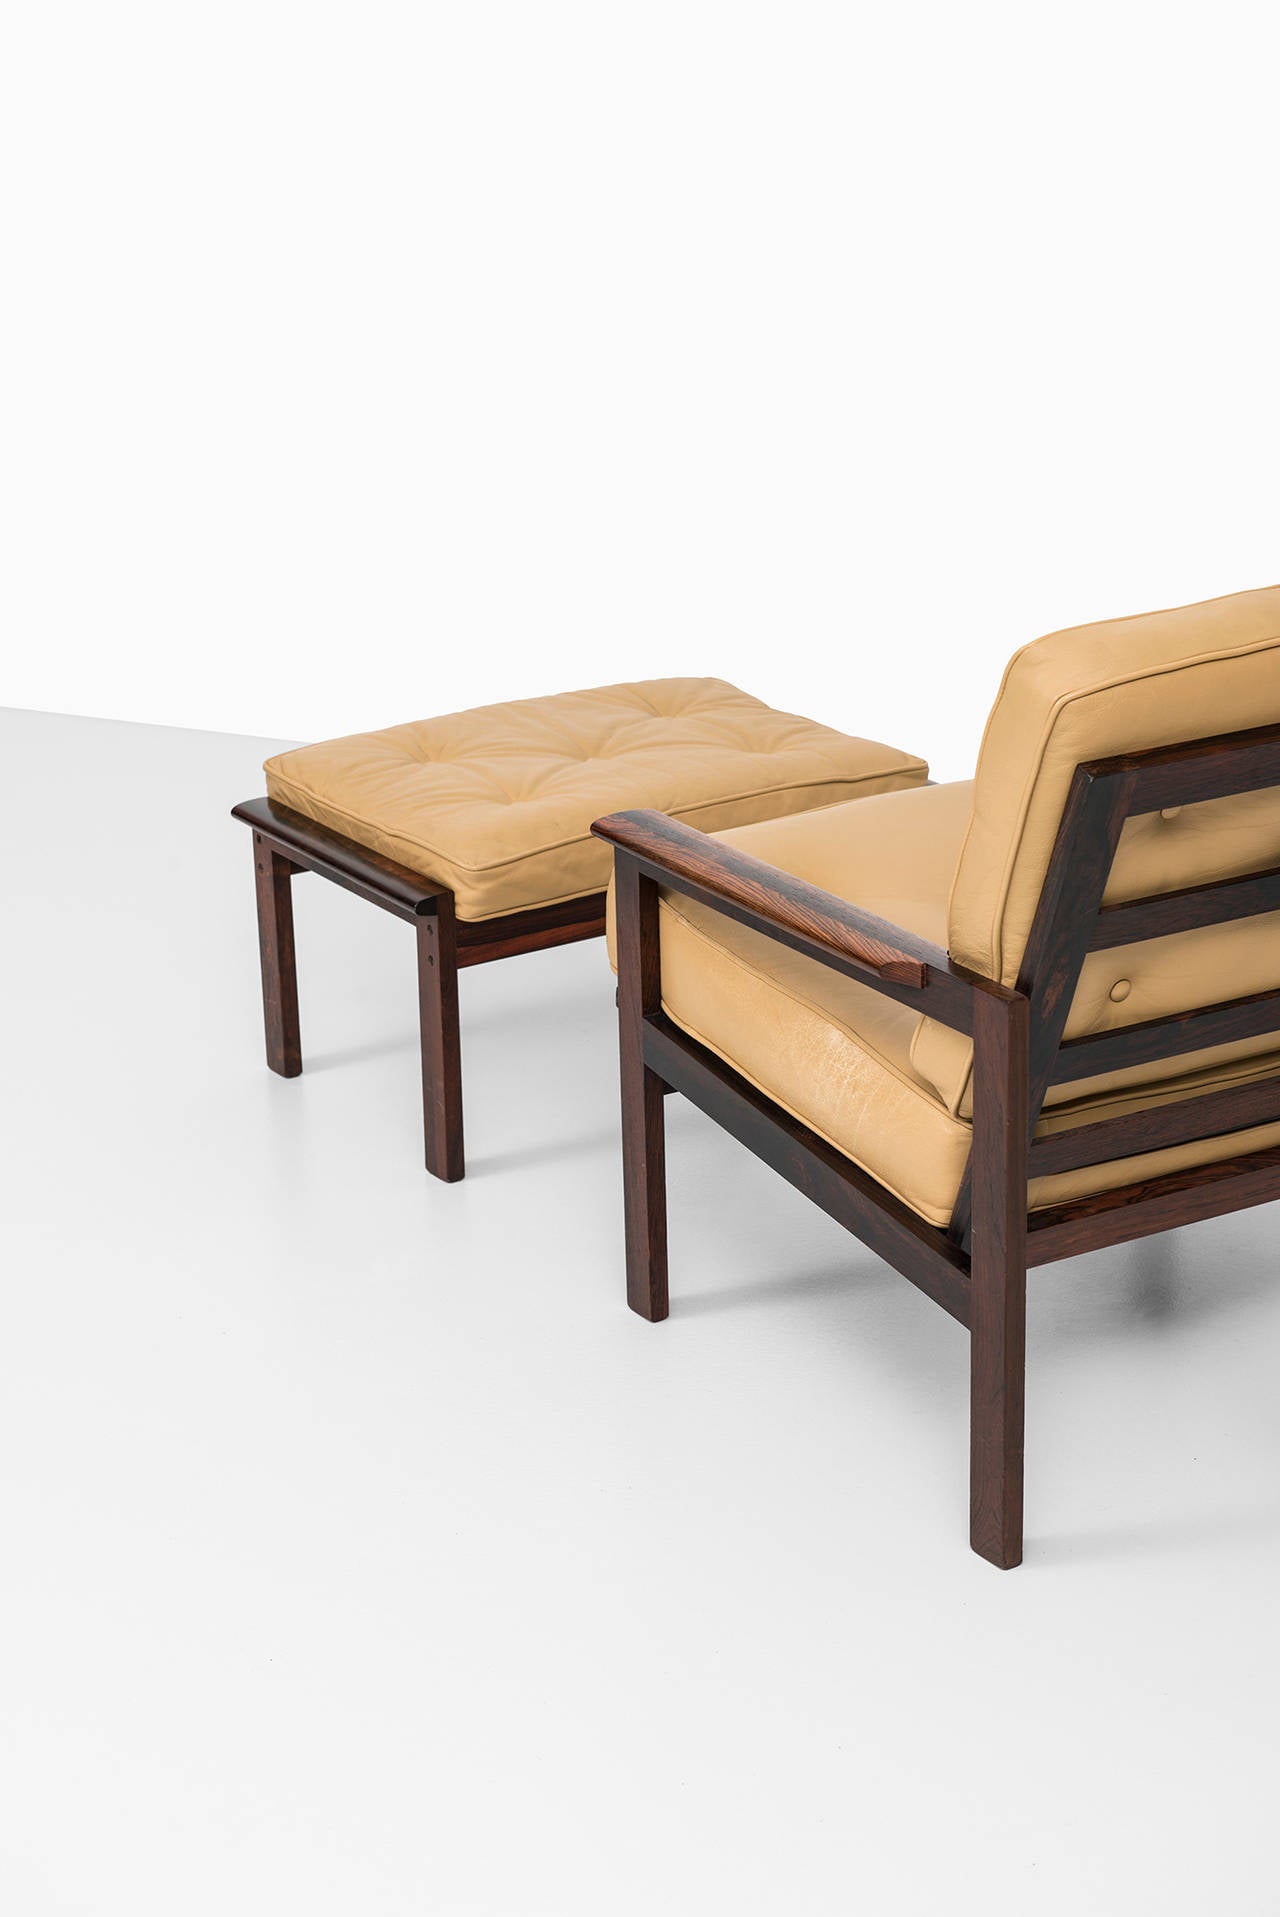 Mid-20th Century Illum Wikkelsø Capella easy chair with stool by Niels Eilersen in Denmark